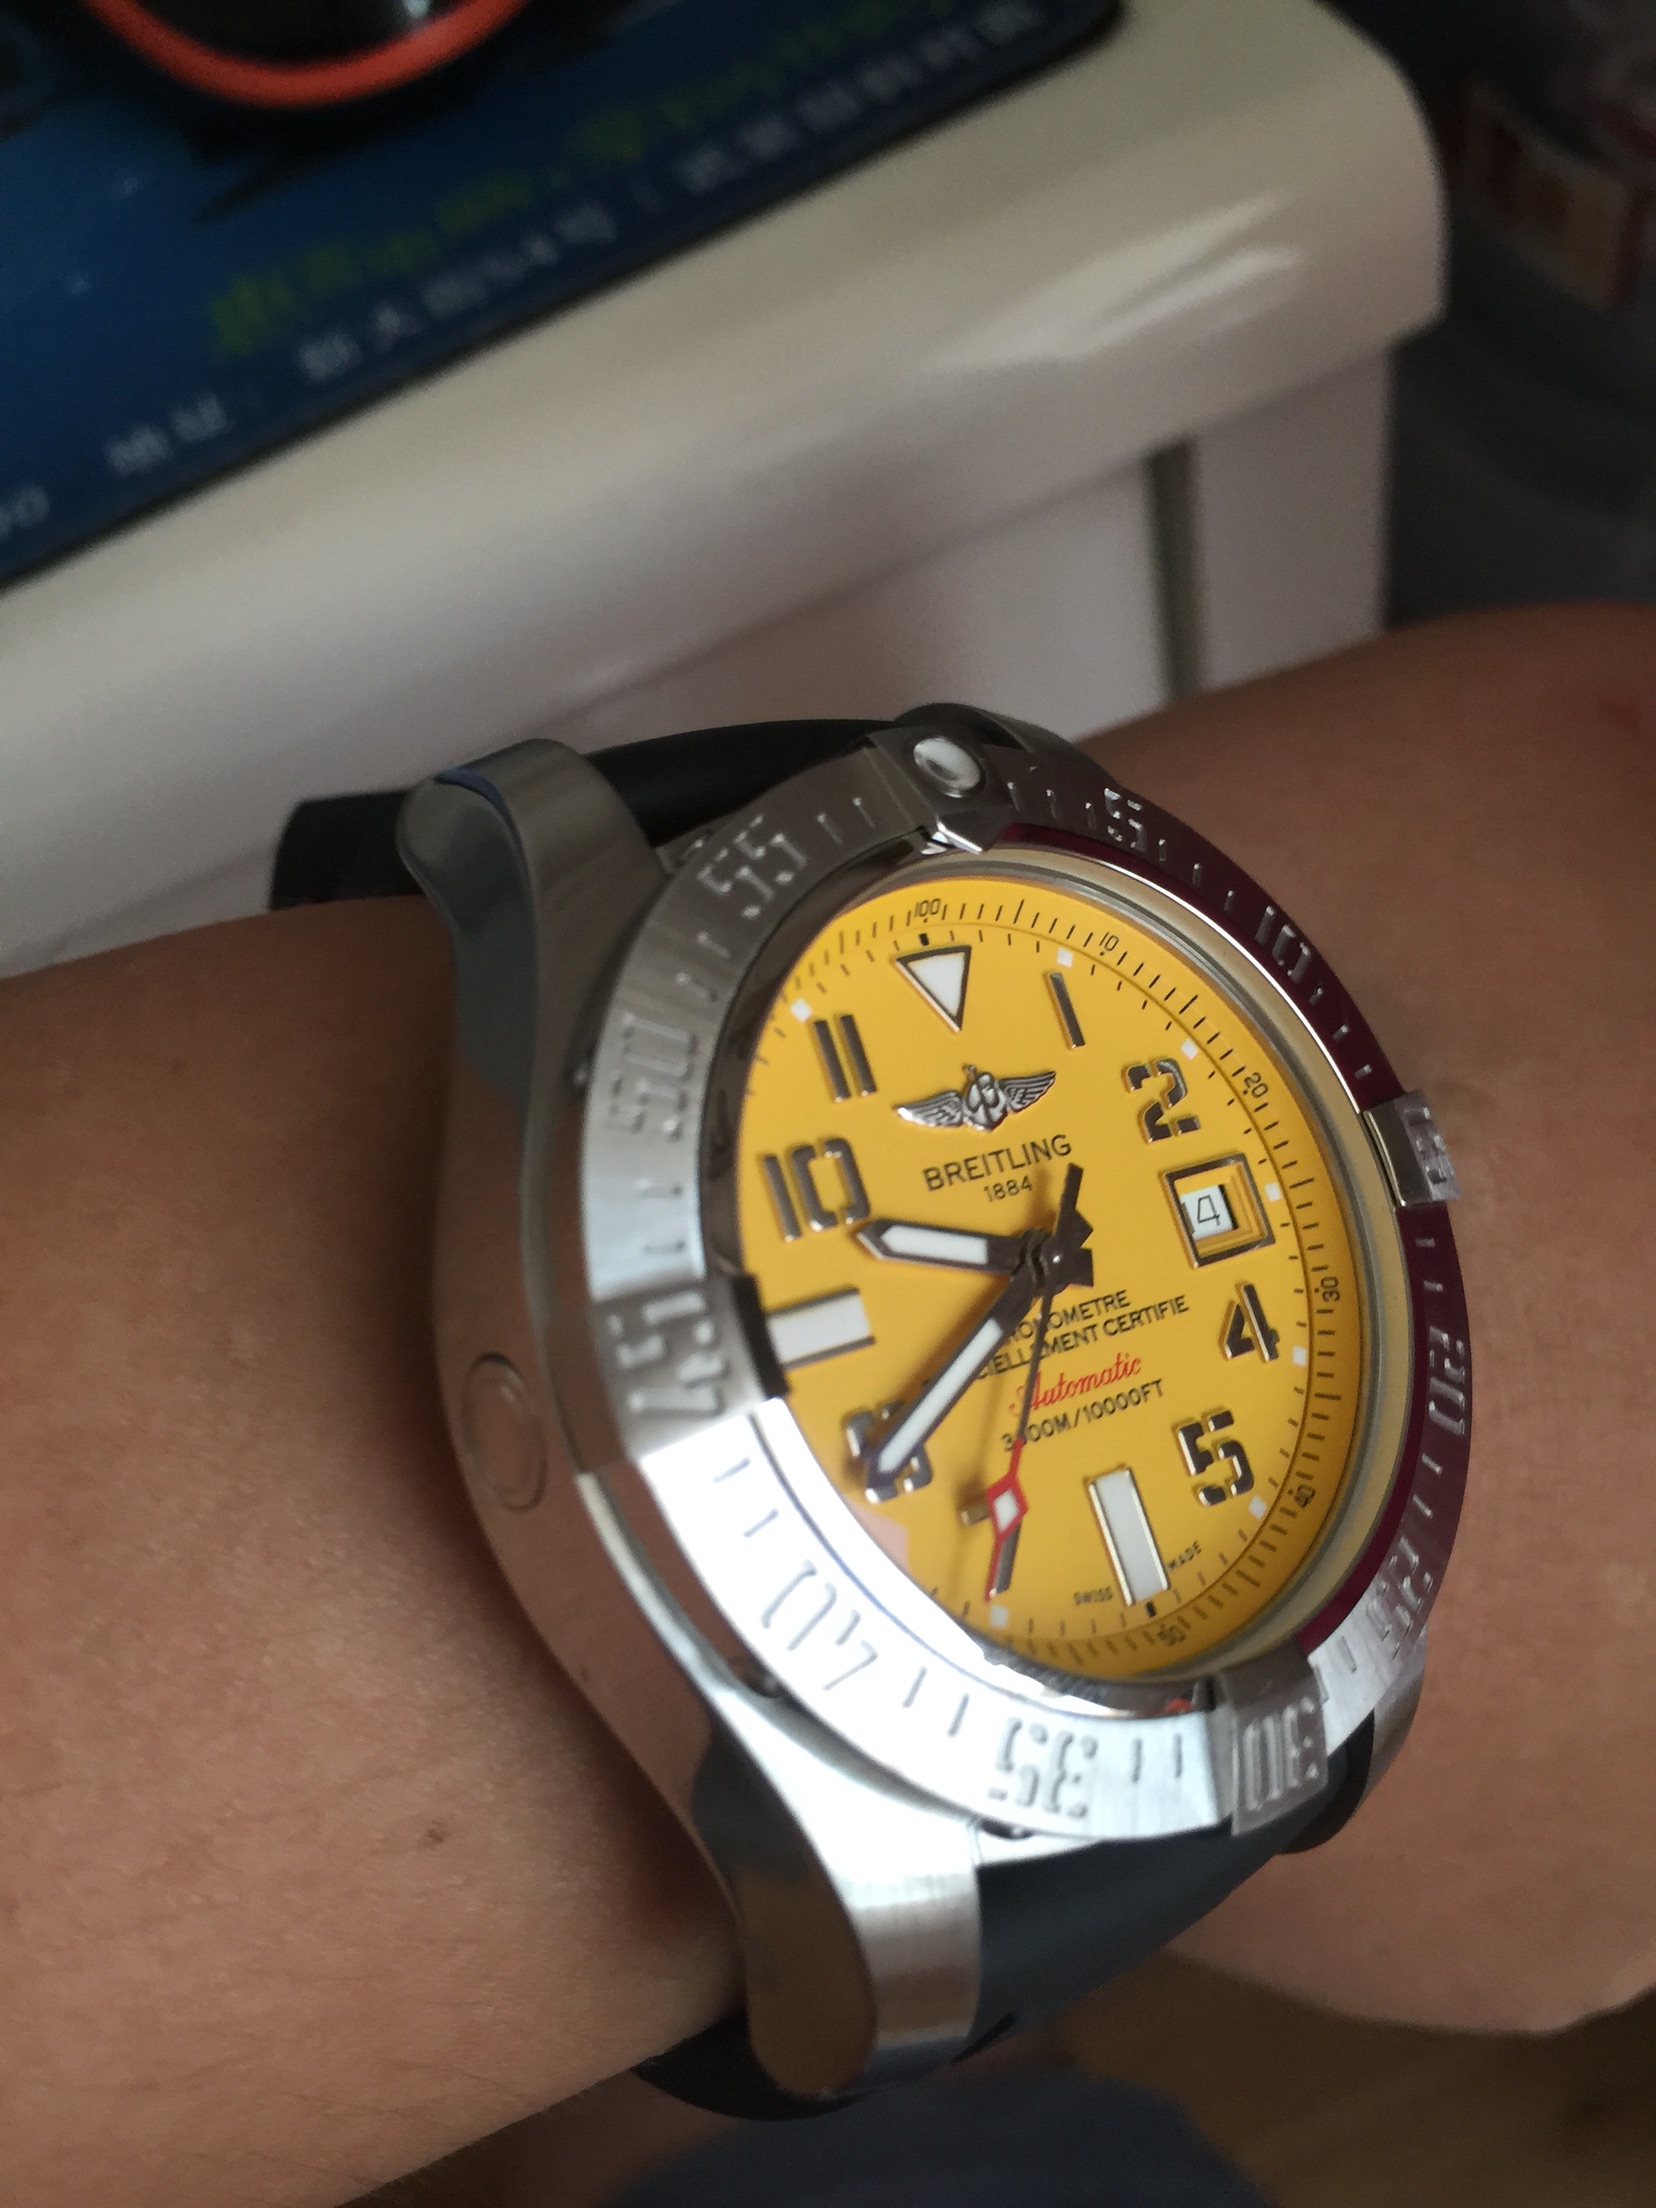 Breitling Imitation watches with yellow dials are outstanding.